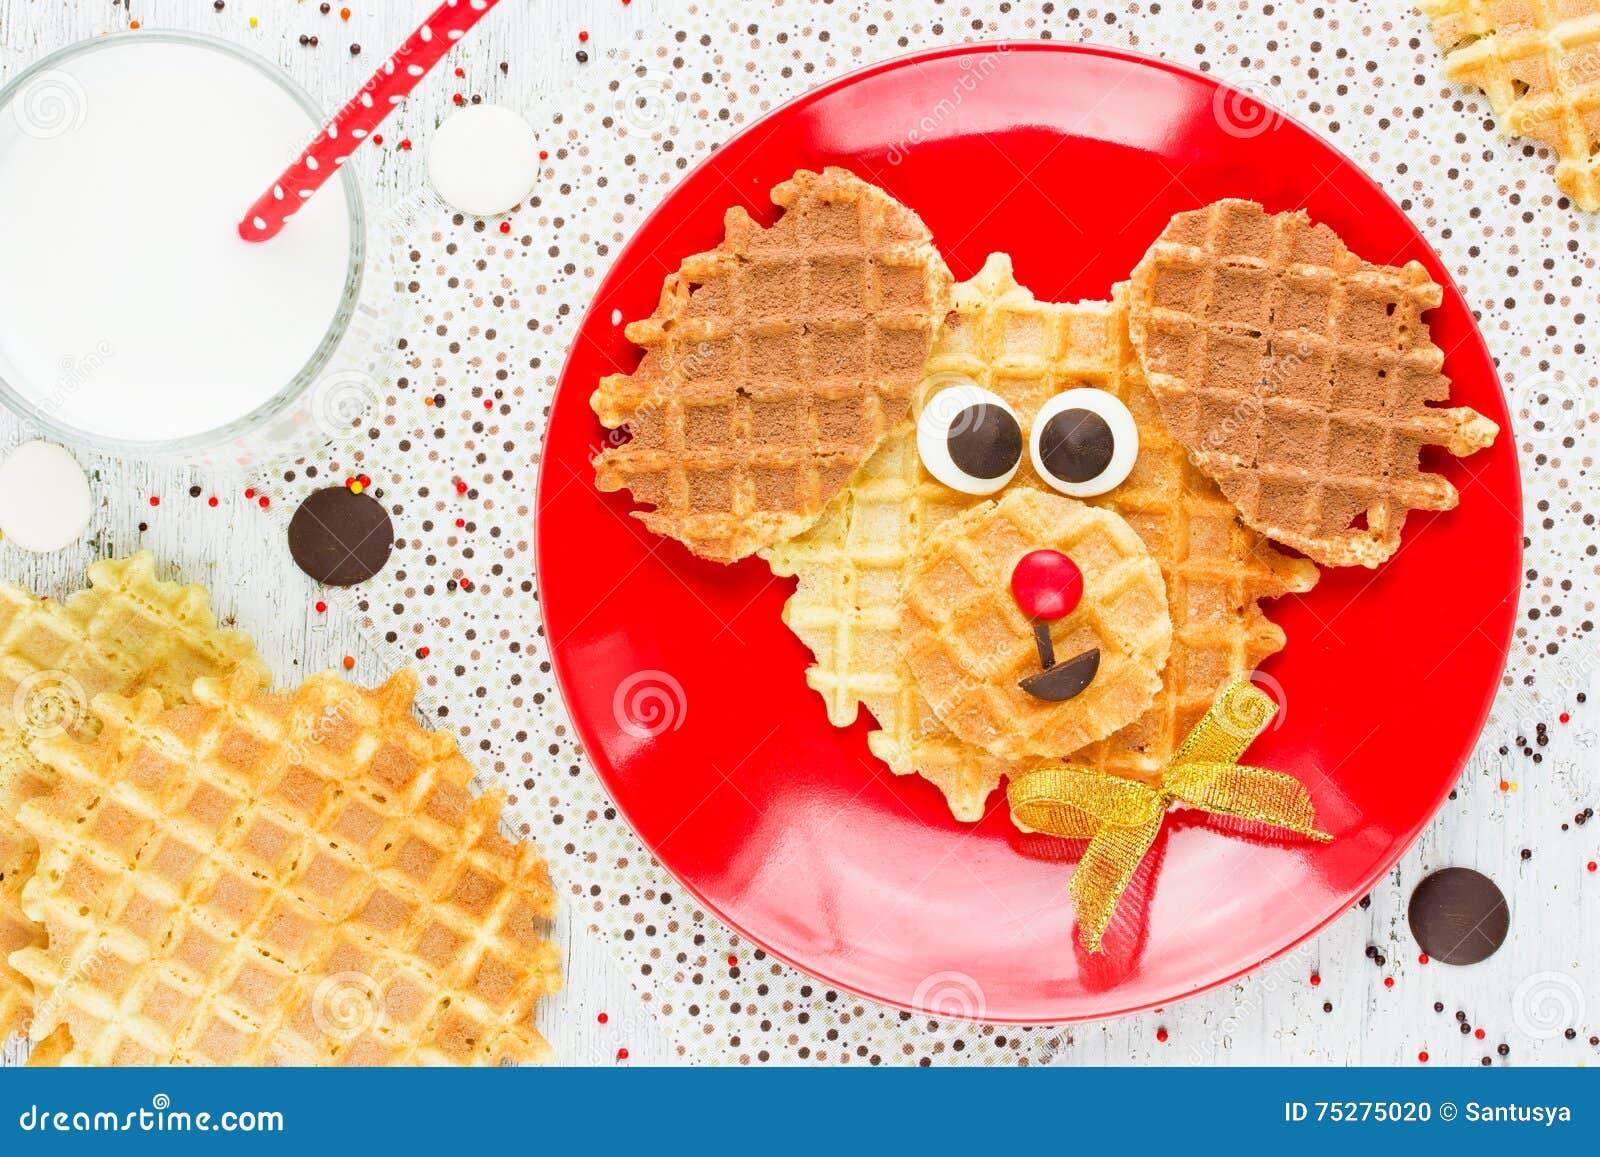 Sweet Waffles with Chocolate and Milk for Baby Breakfast. Creative Idea for  Children Fun Dessert or Breakfast - Puppy Dog Shaped Stock Photo - Image of  dessert, cookie: 75275020